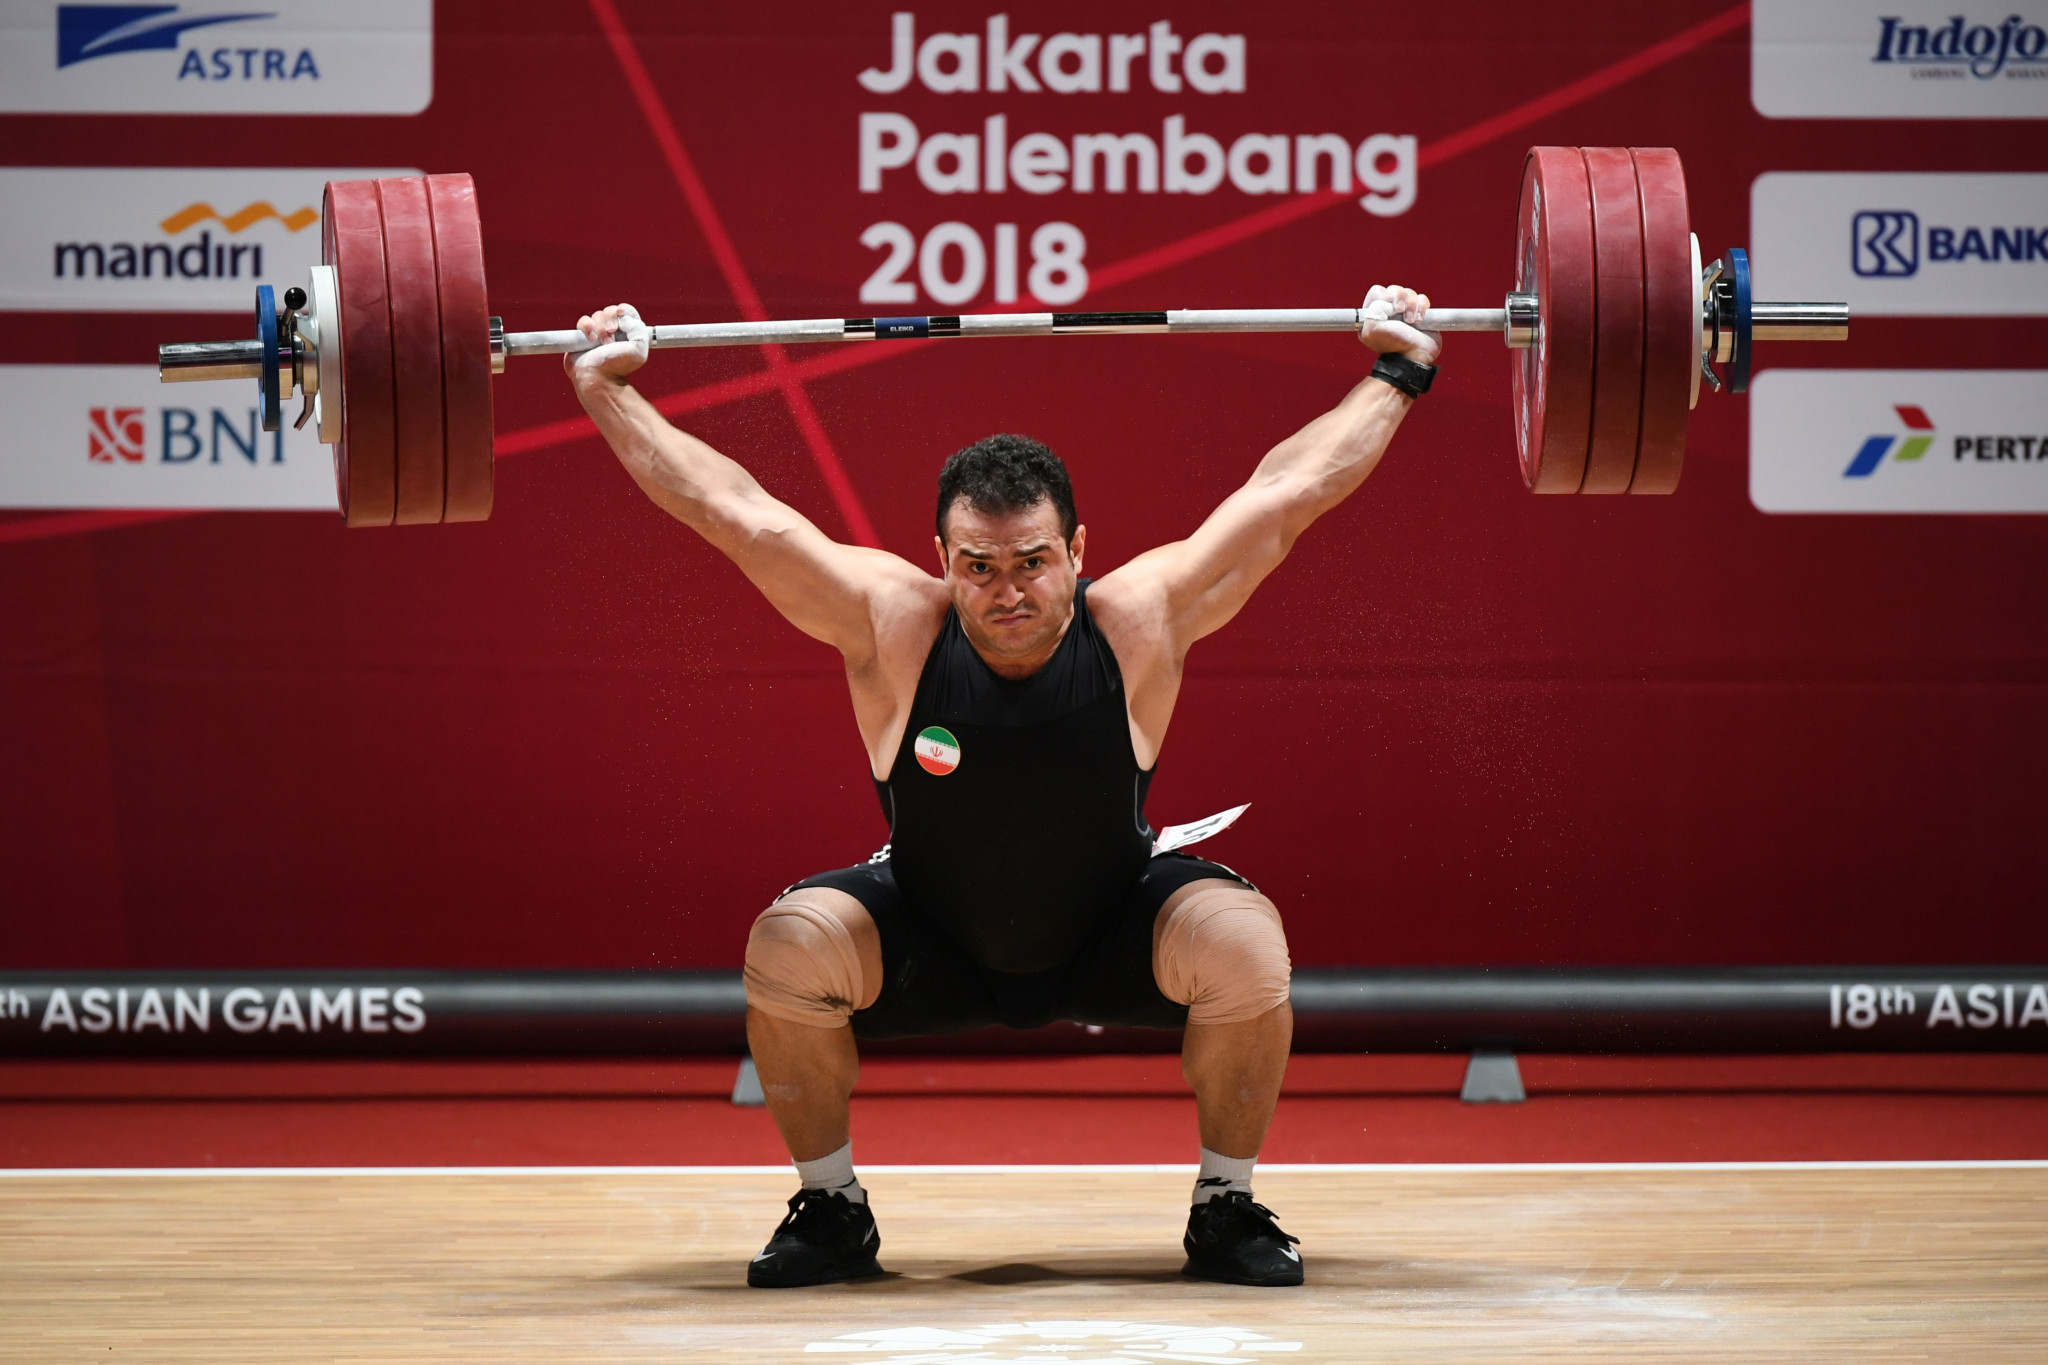 Sohrab Moradi from Iran gained his third weightlifting world record today, when he lifted a snatch of 189kg in the men's 94kg final ©Getty Images